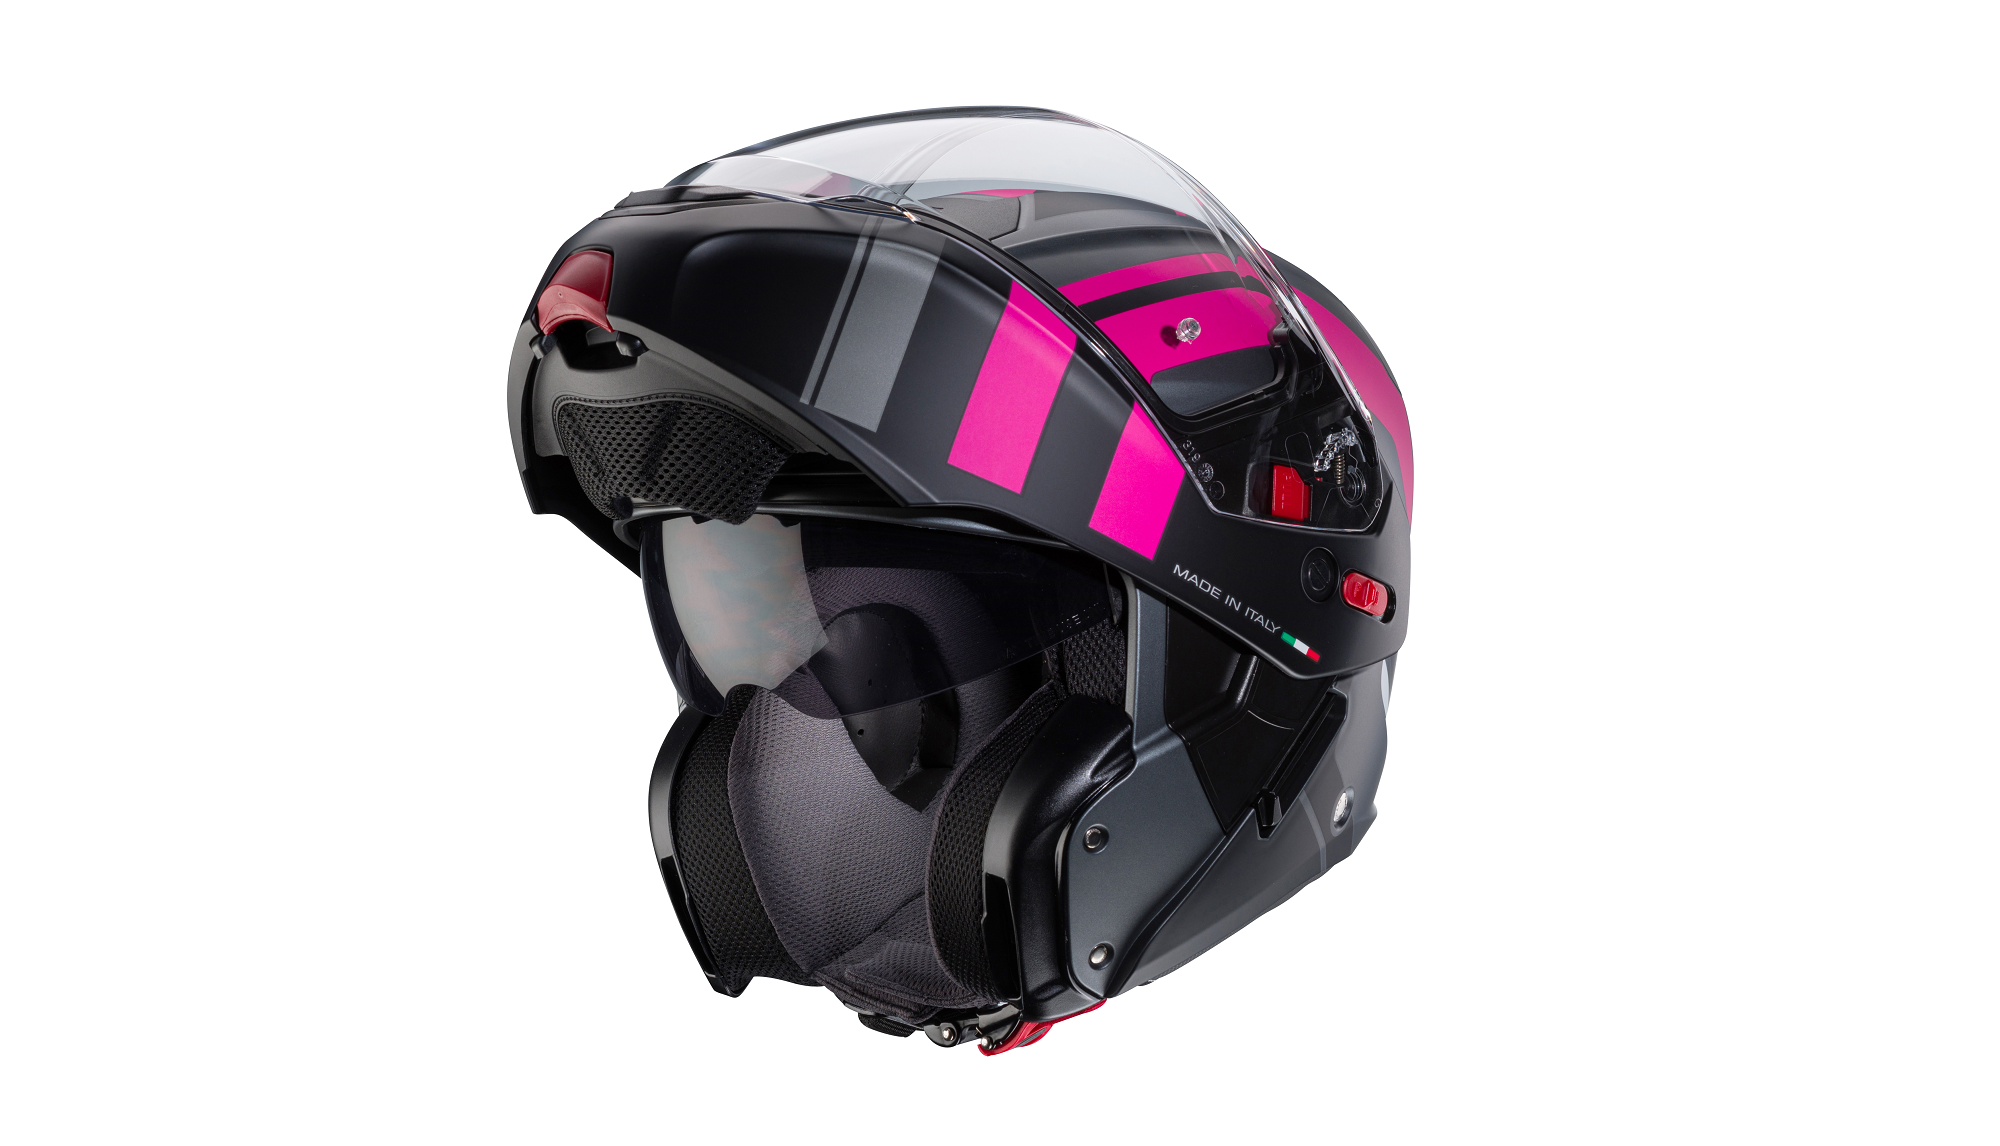 Two new jet helmets launched by Tucano Urbano